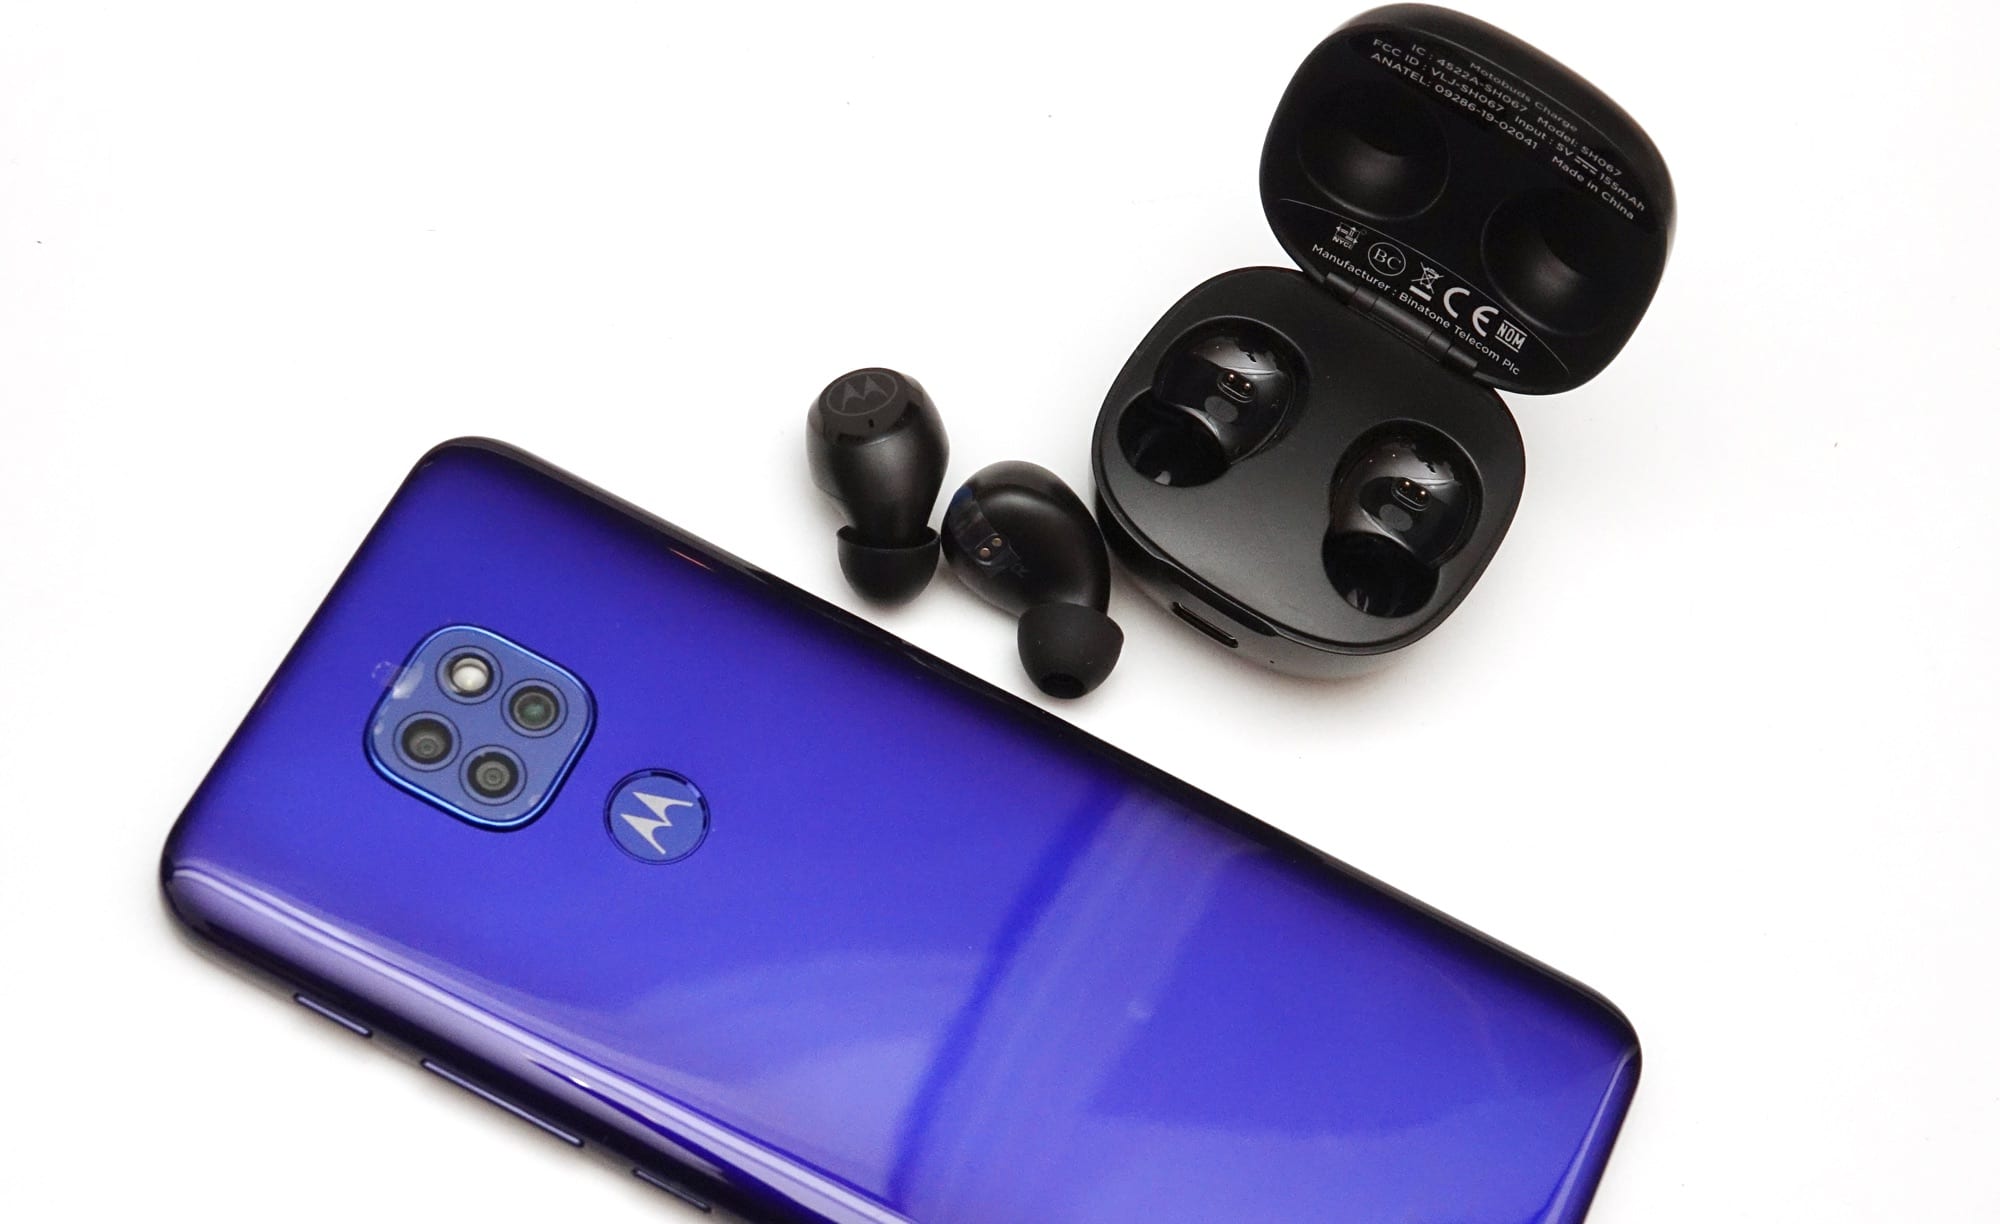 Moto G9 Play with wireless earbuds